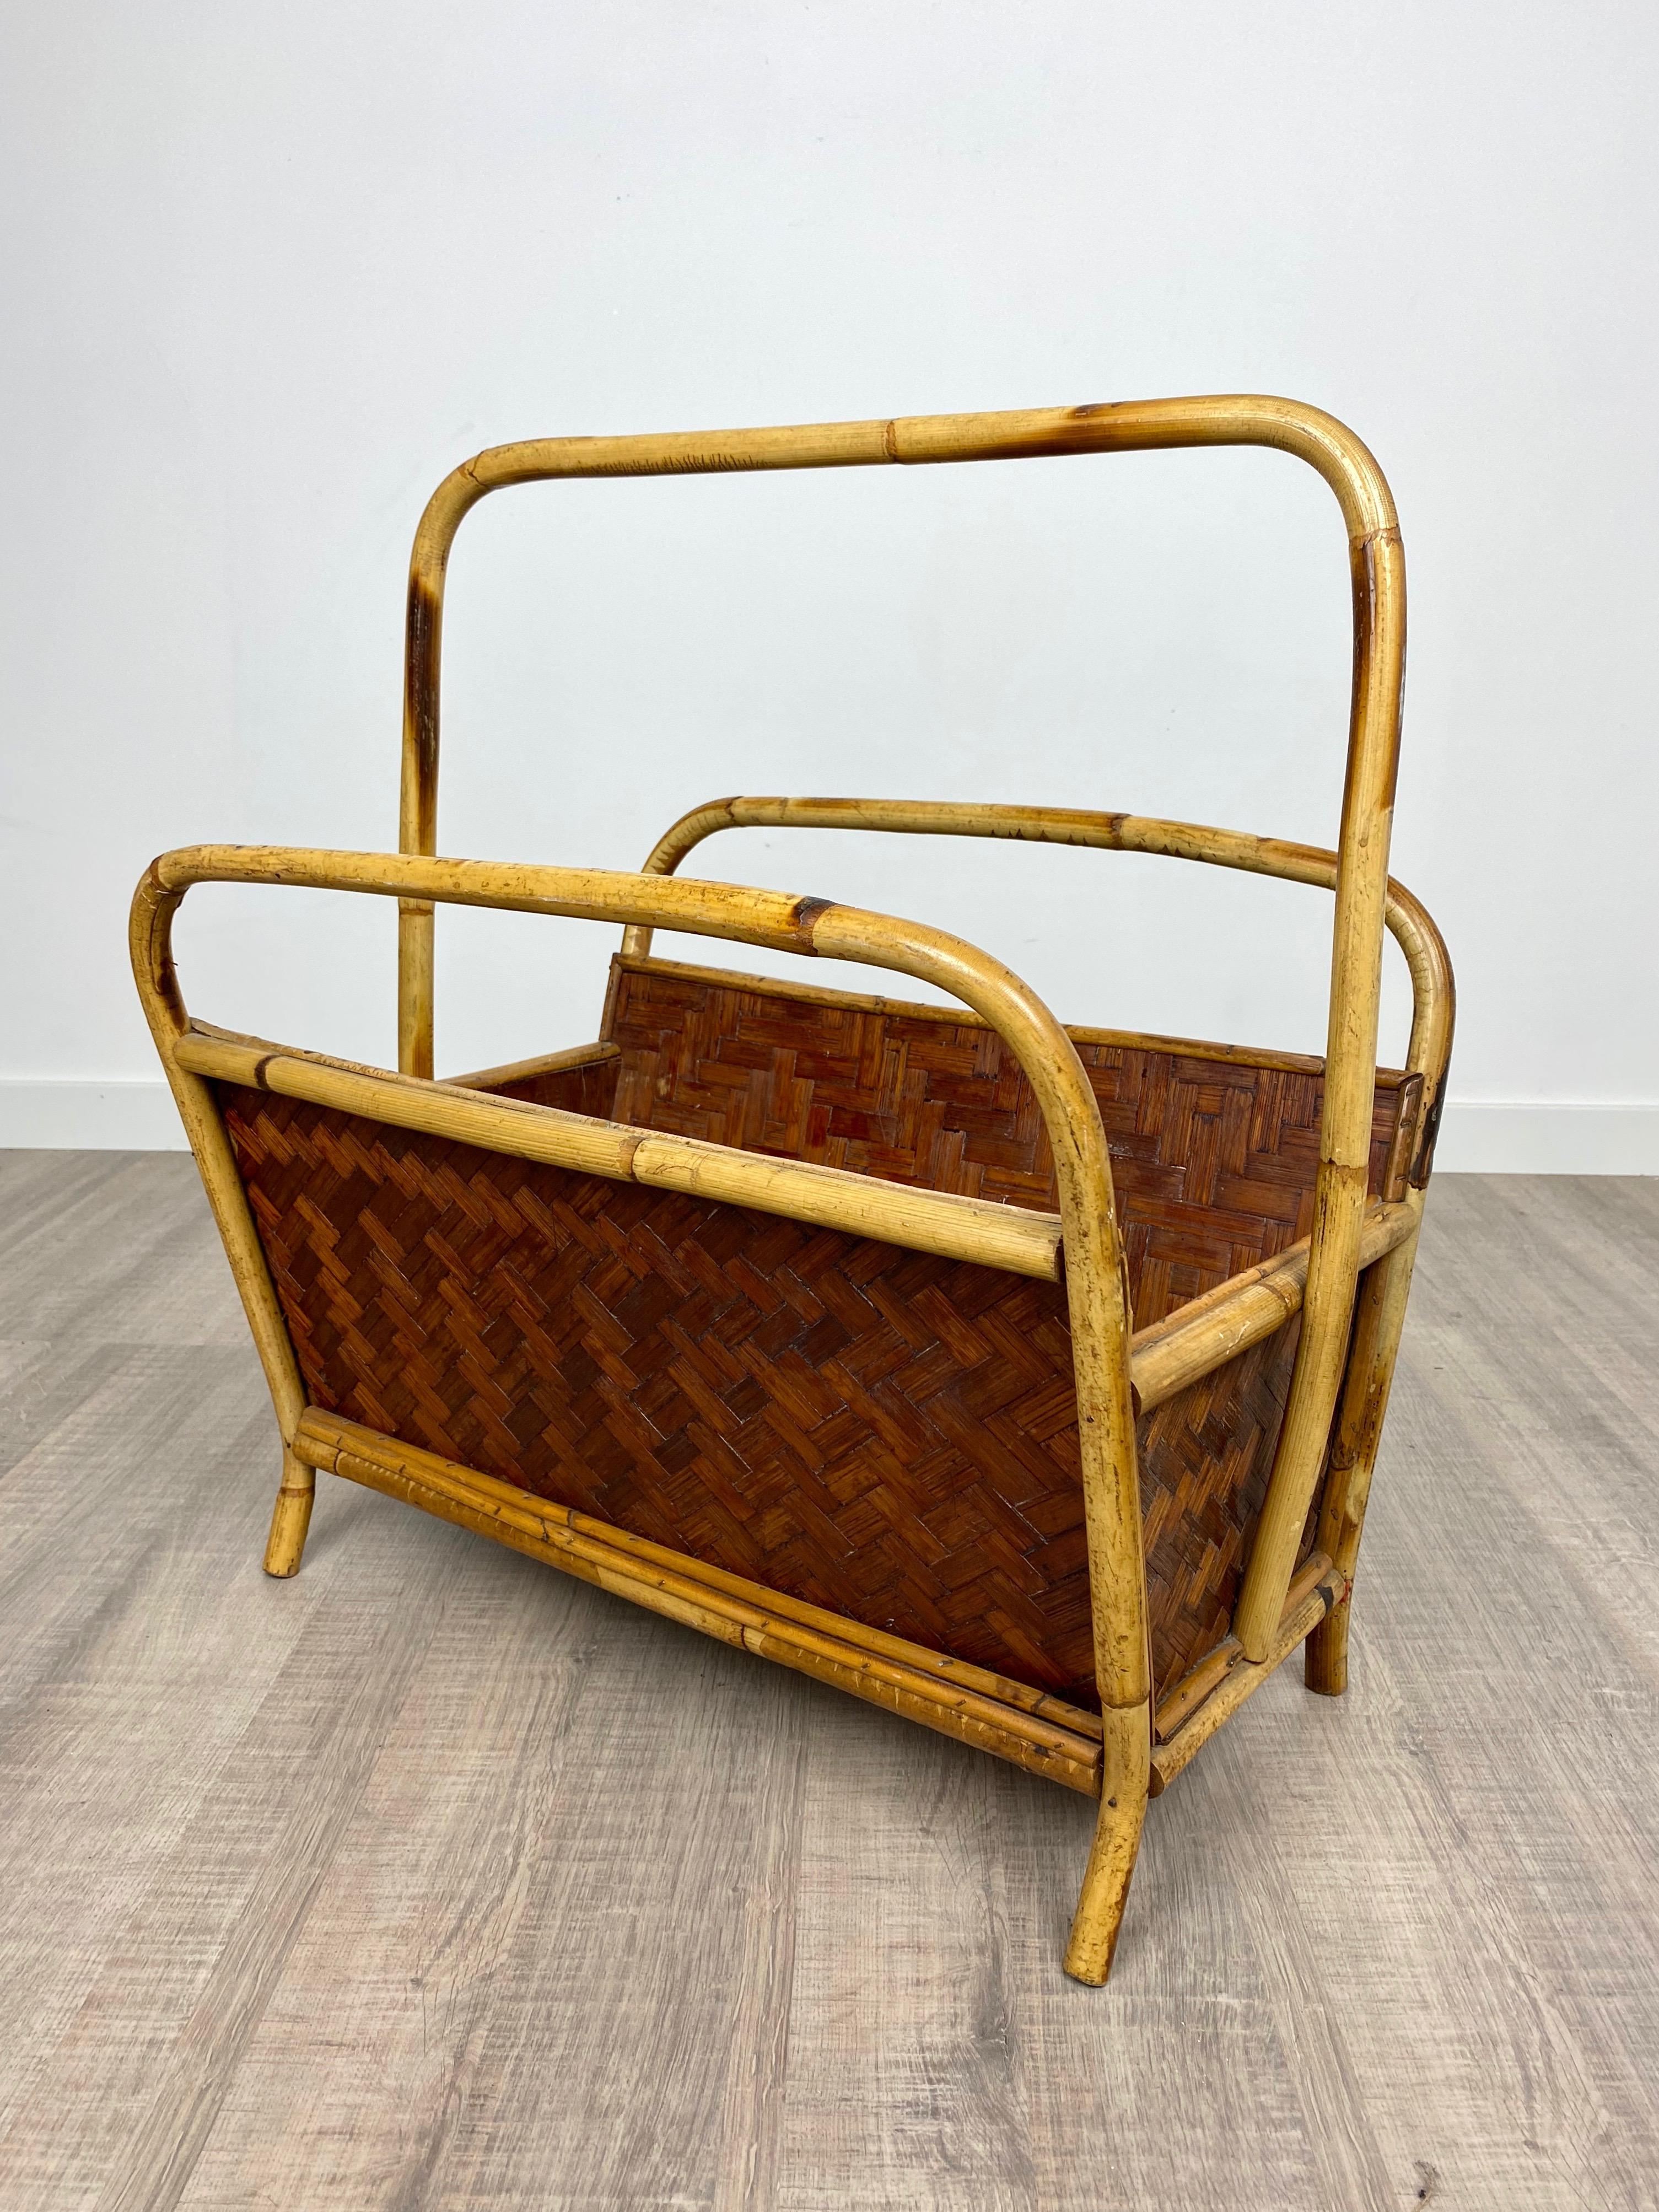 Rattan and Bamboo Magazine Rack Italy 1960s Franco Albini Style For Sale 4